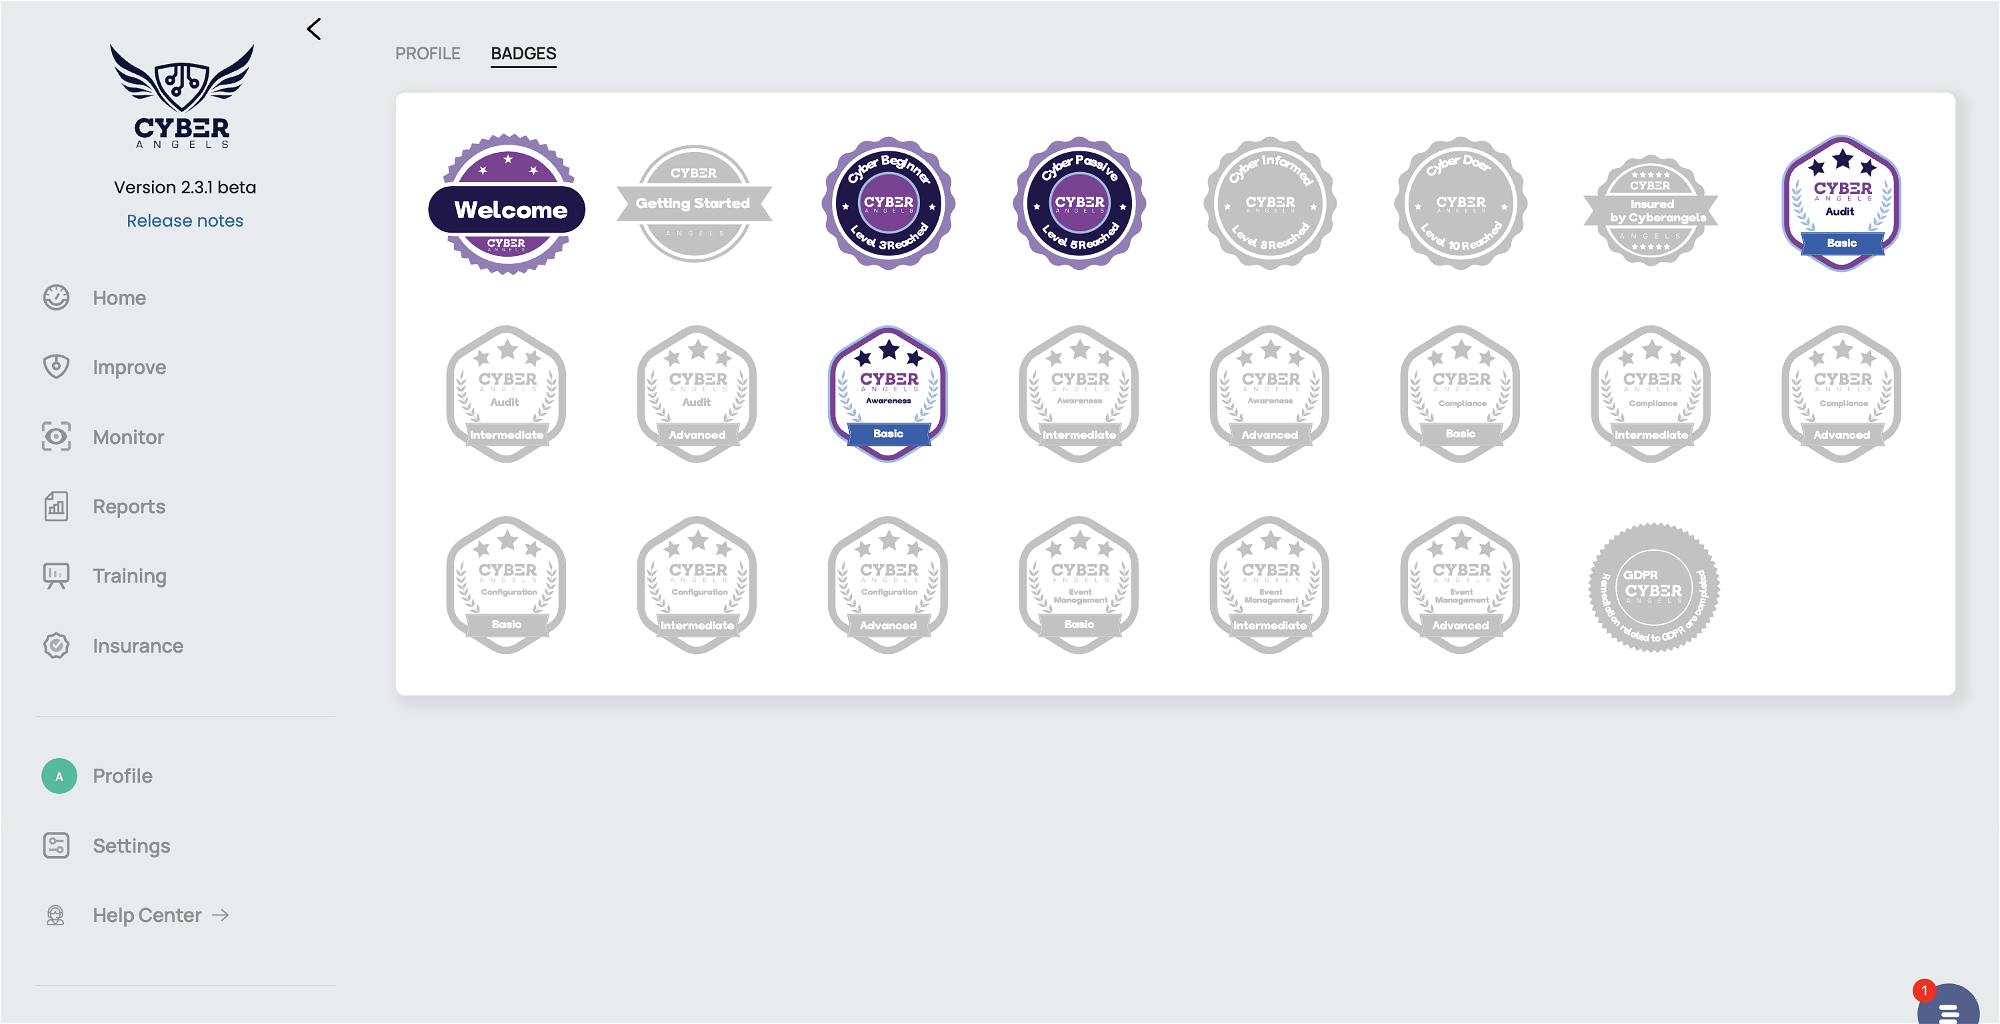 Gamification collectible badges